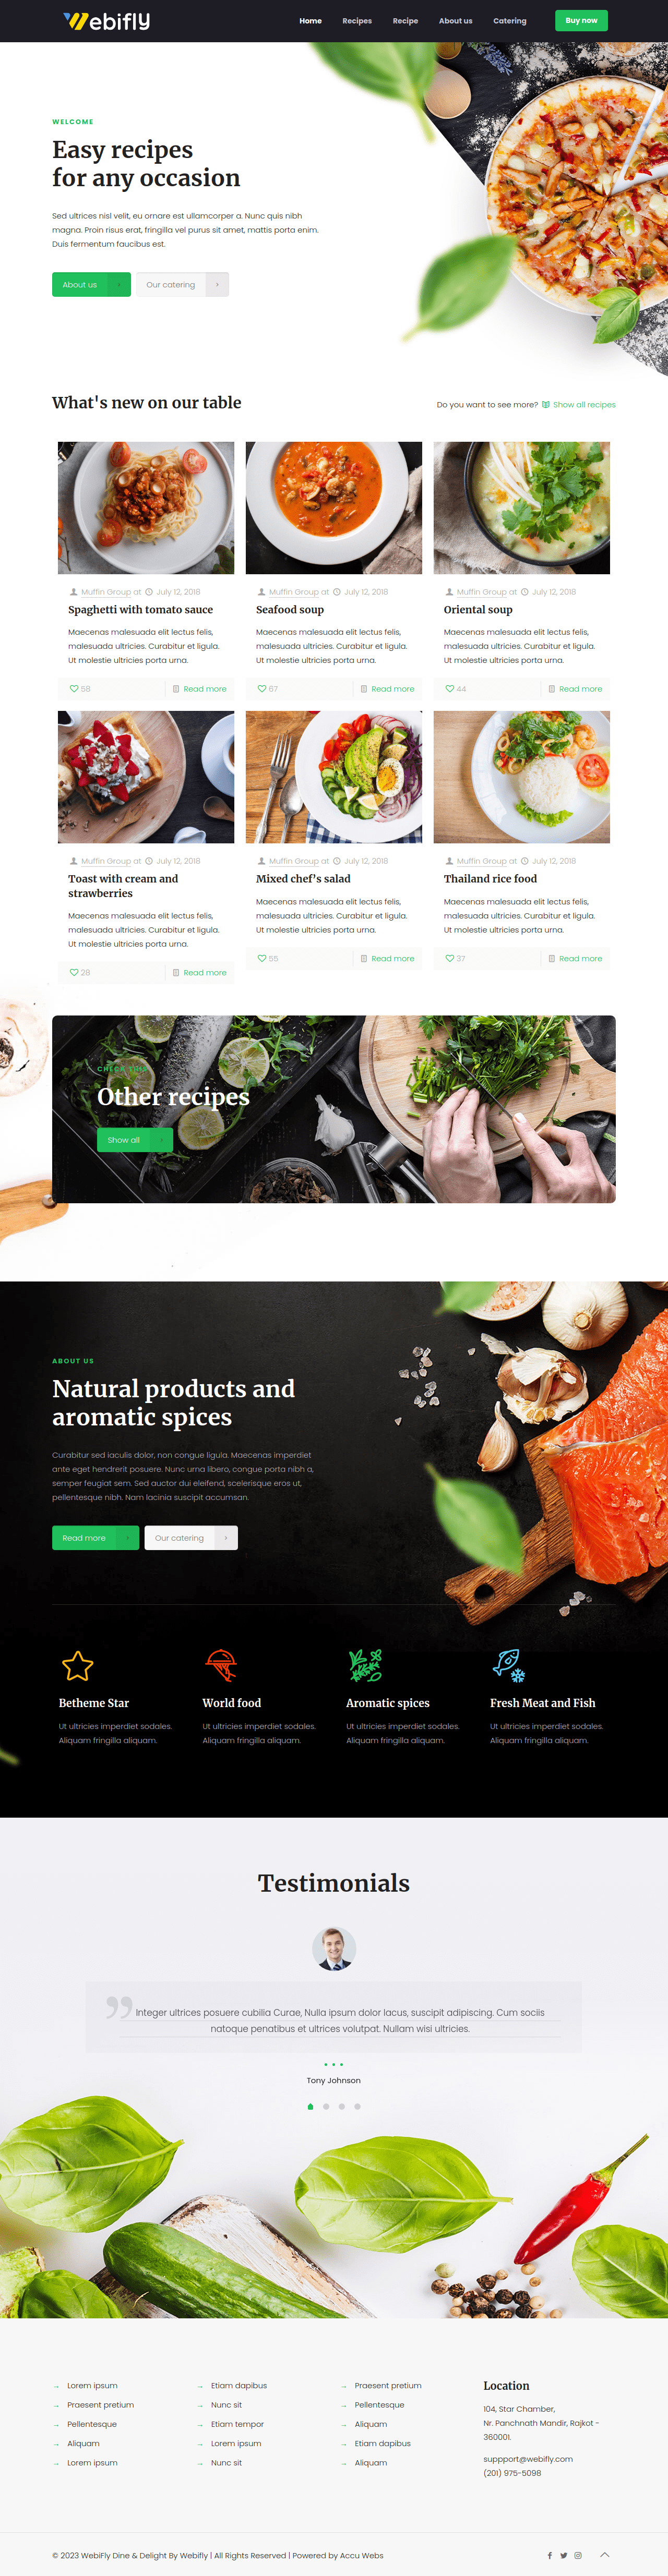 Dine and Delight restaurant website templates